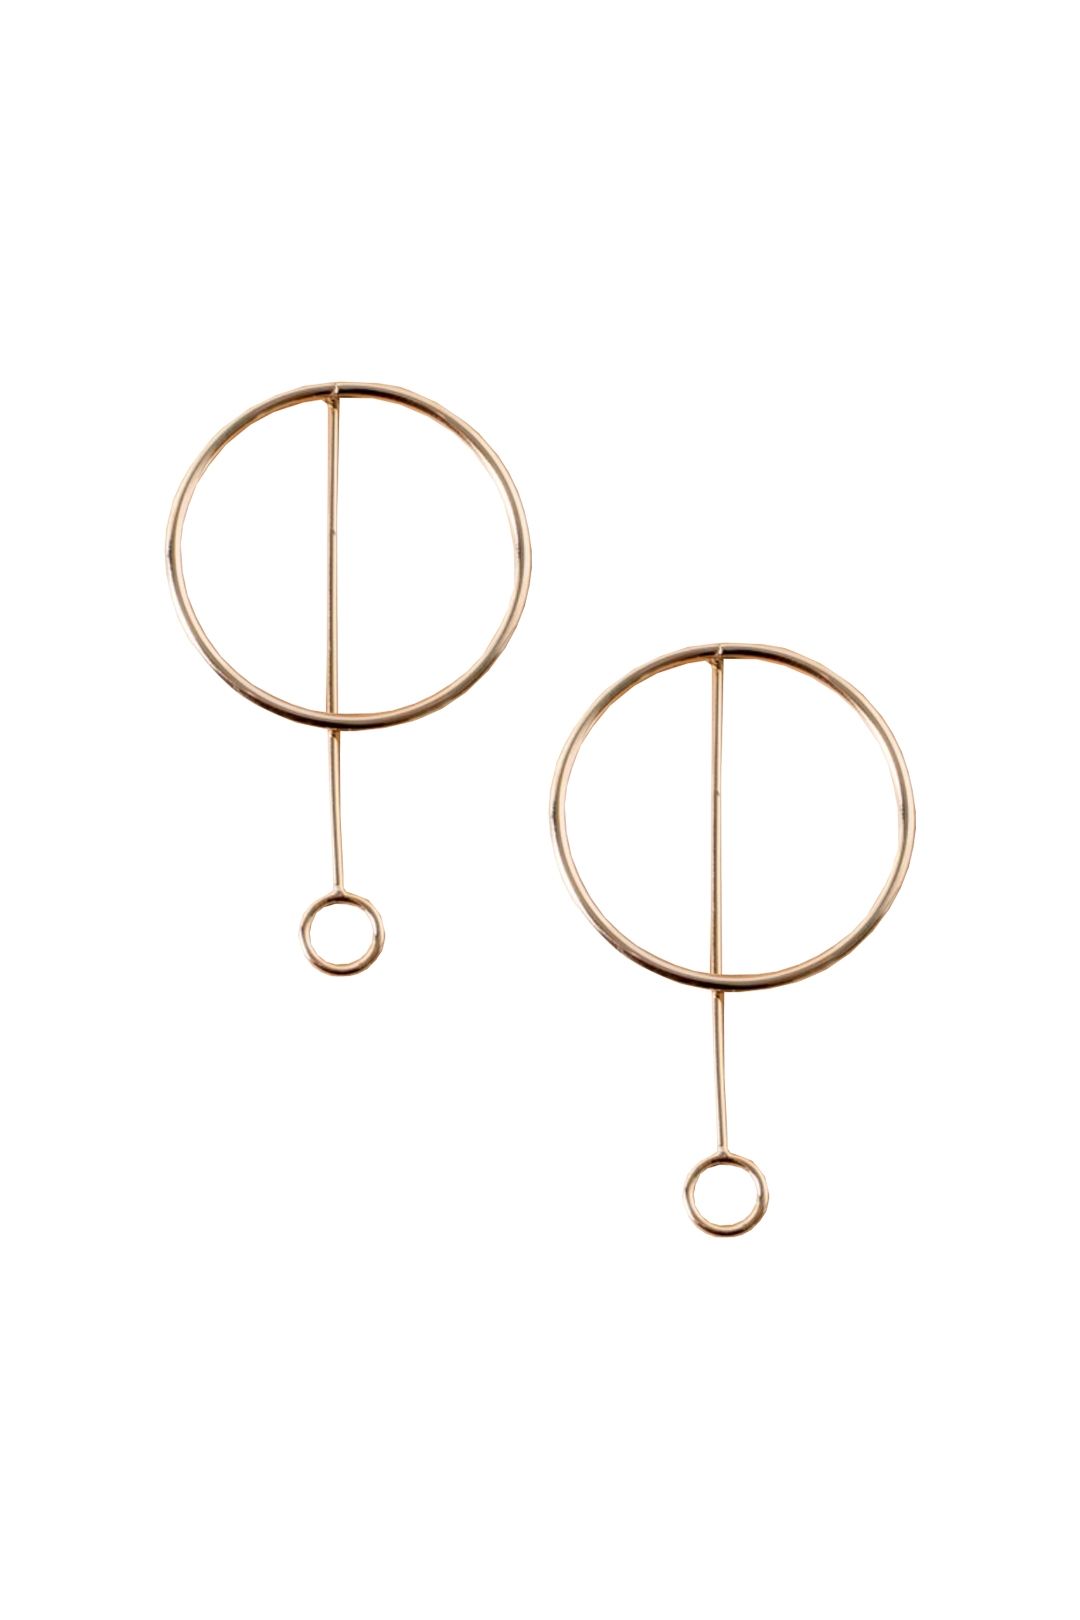 Adorne - Large Metal Ring Rod and Ring Drop Earring - Gold - Front